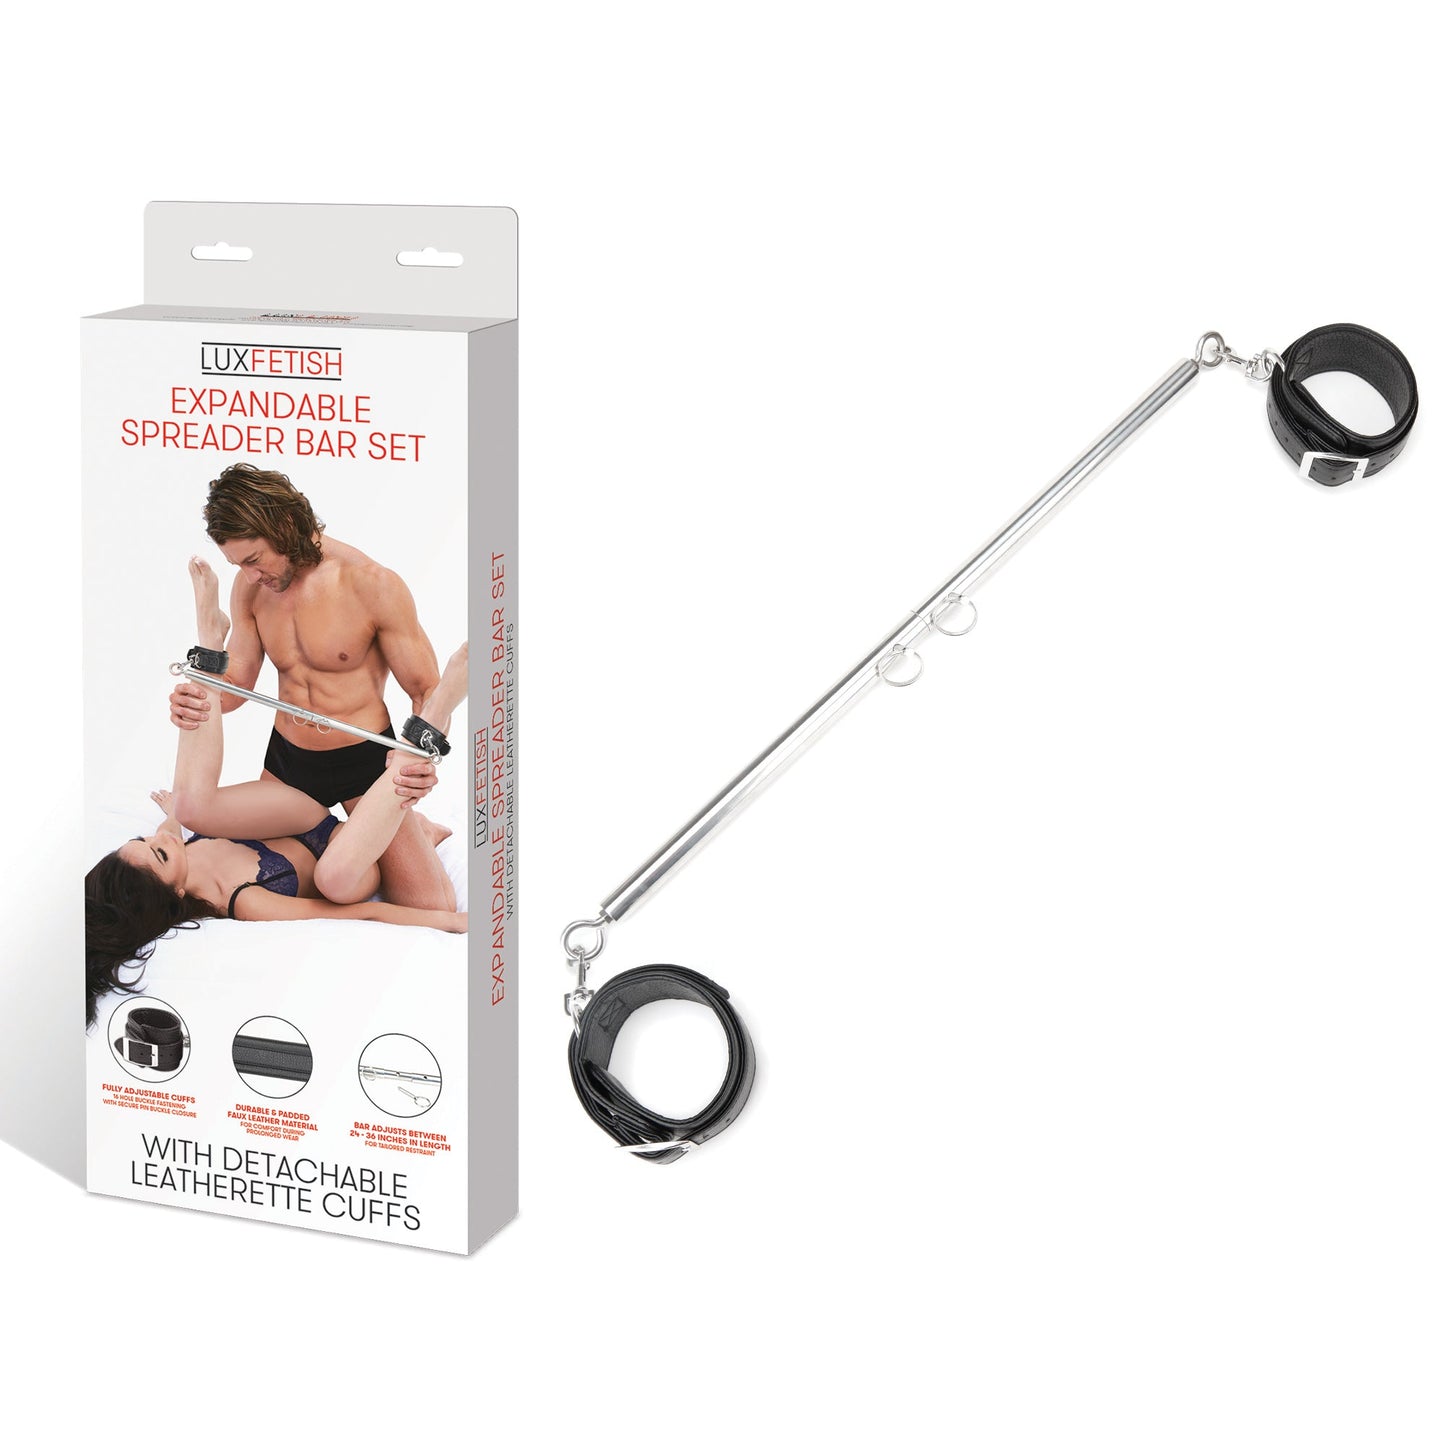 Expandable Spreader Bar Set with Detachable Cuffs